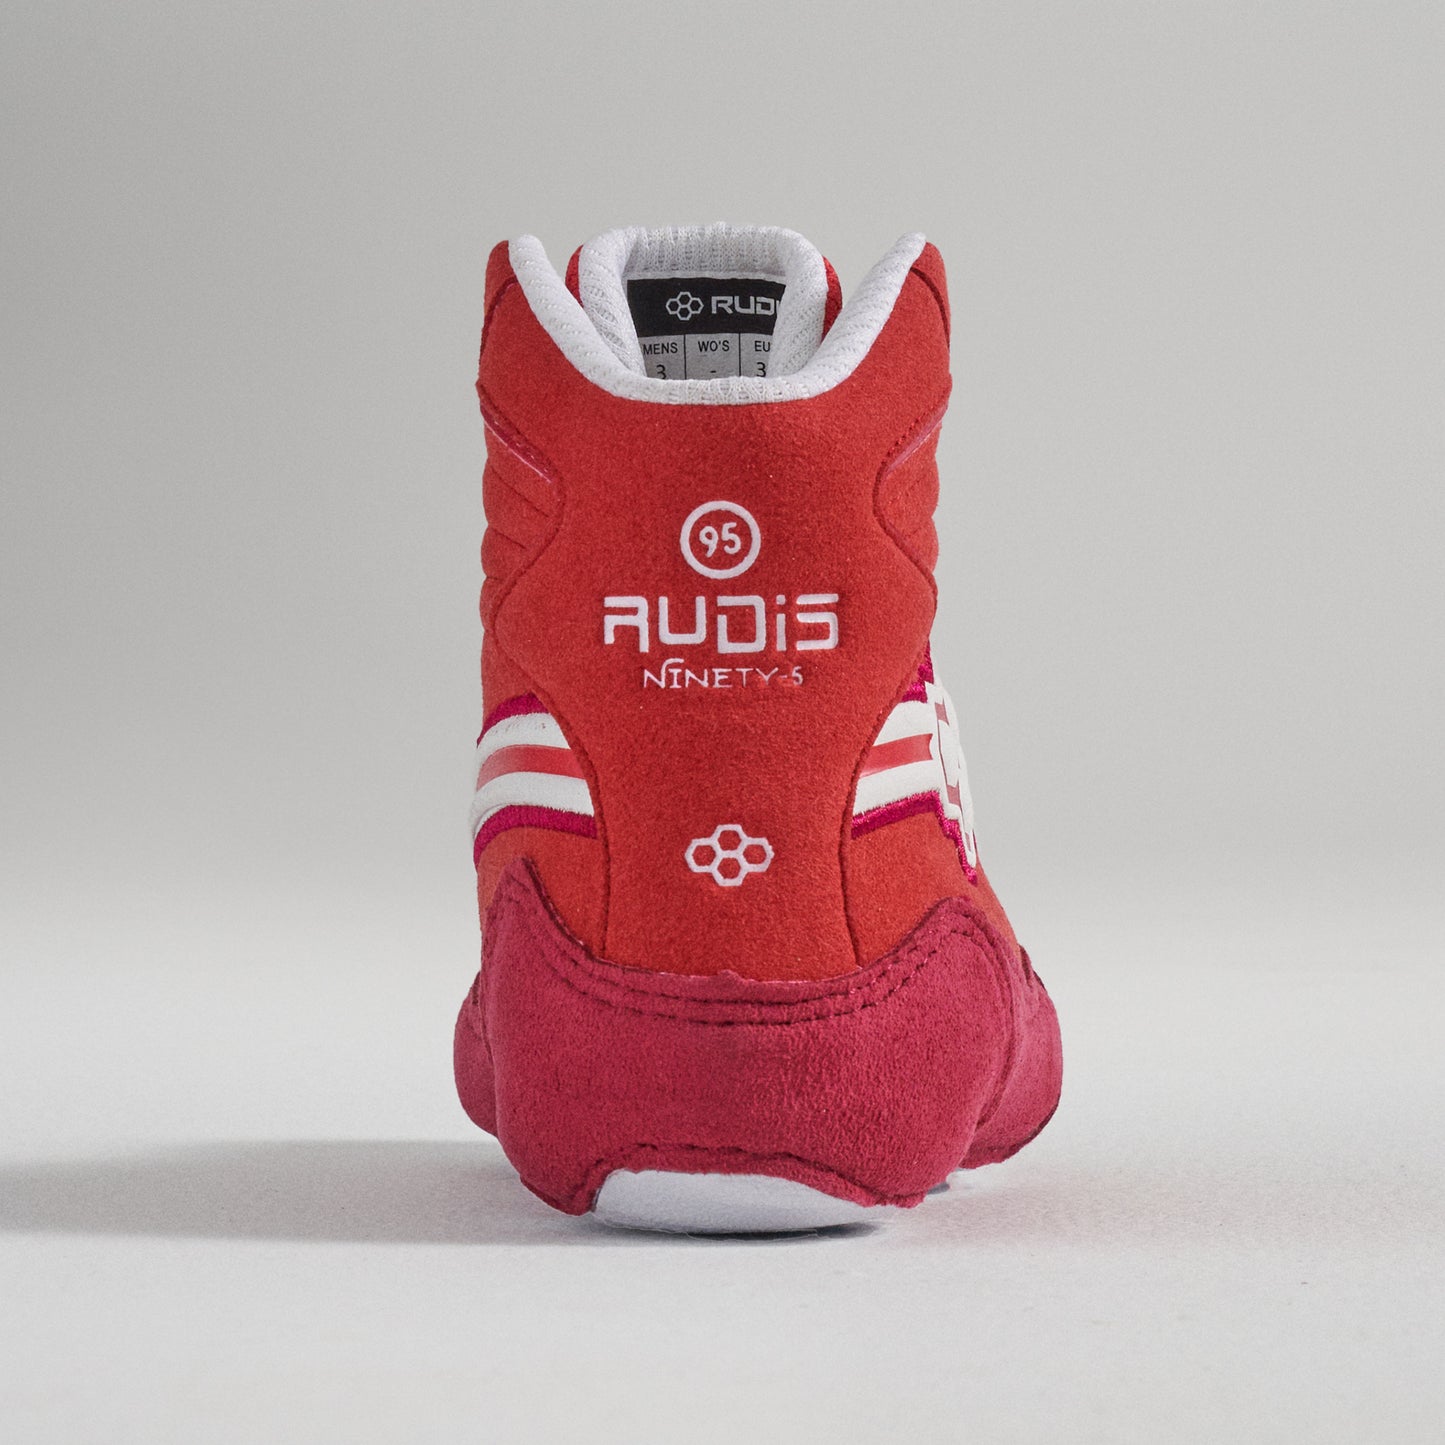 RUDIS Ninety-5 Youth Wrestling Shoes - Red